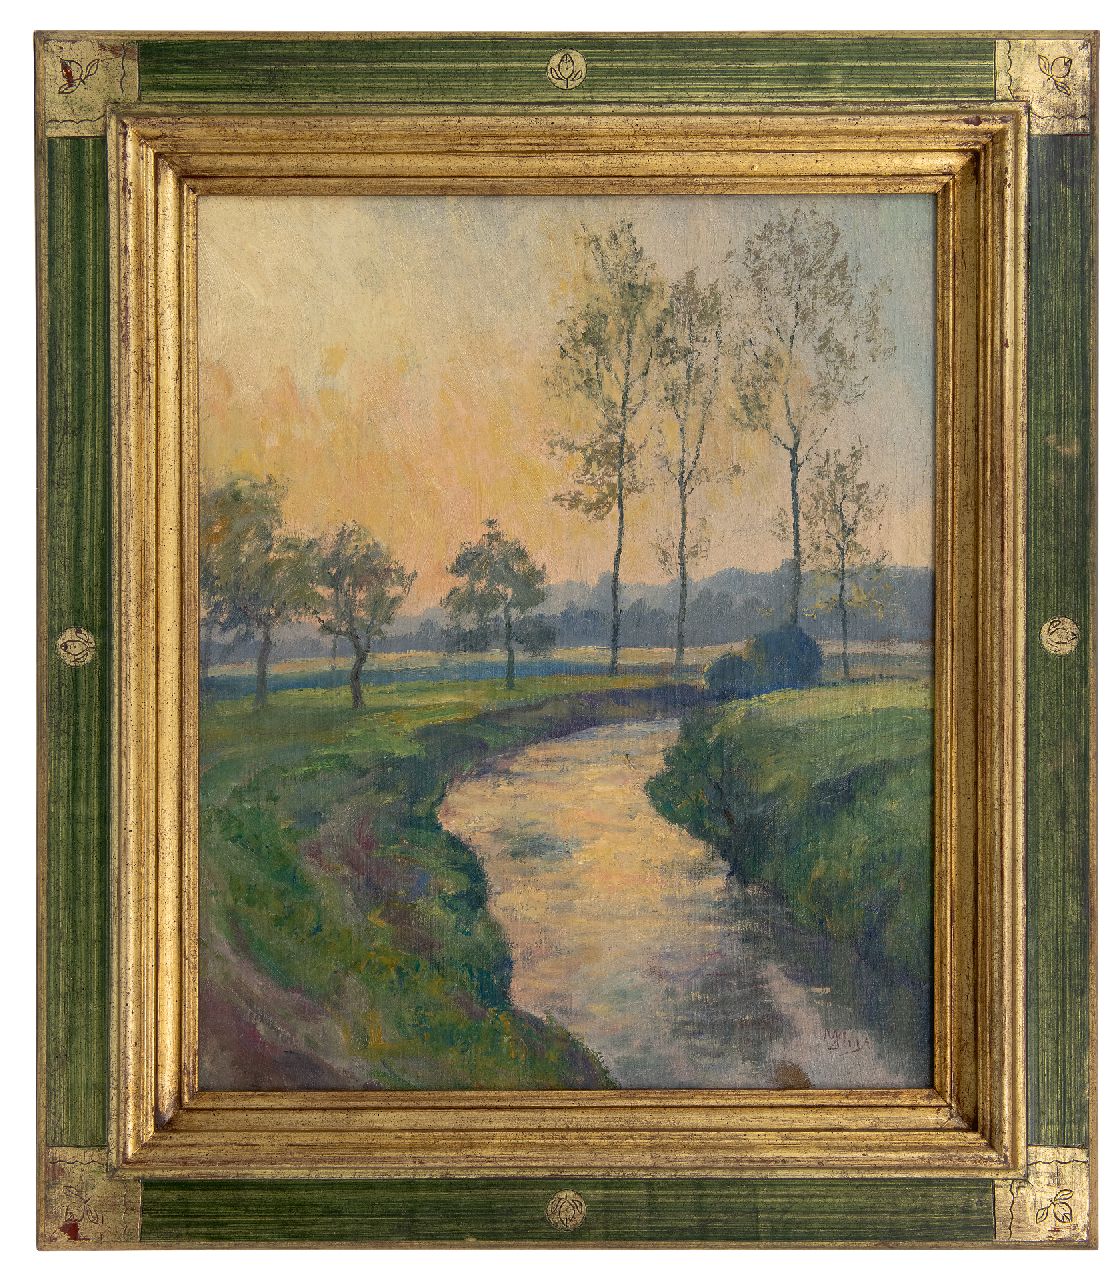 Huys M.  | Modest Huys | Paintings offered for sale | Flemish landscape with a stream (probably de Mandel or de Leie), oil on canvas 60.5 x 50.3 cm, signed l.r.